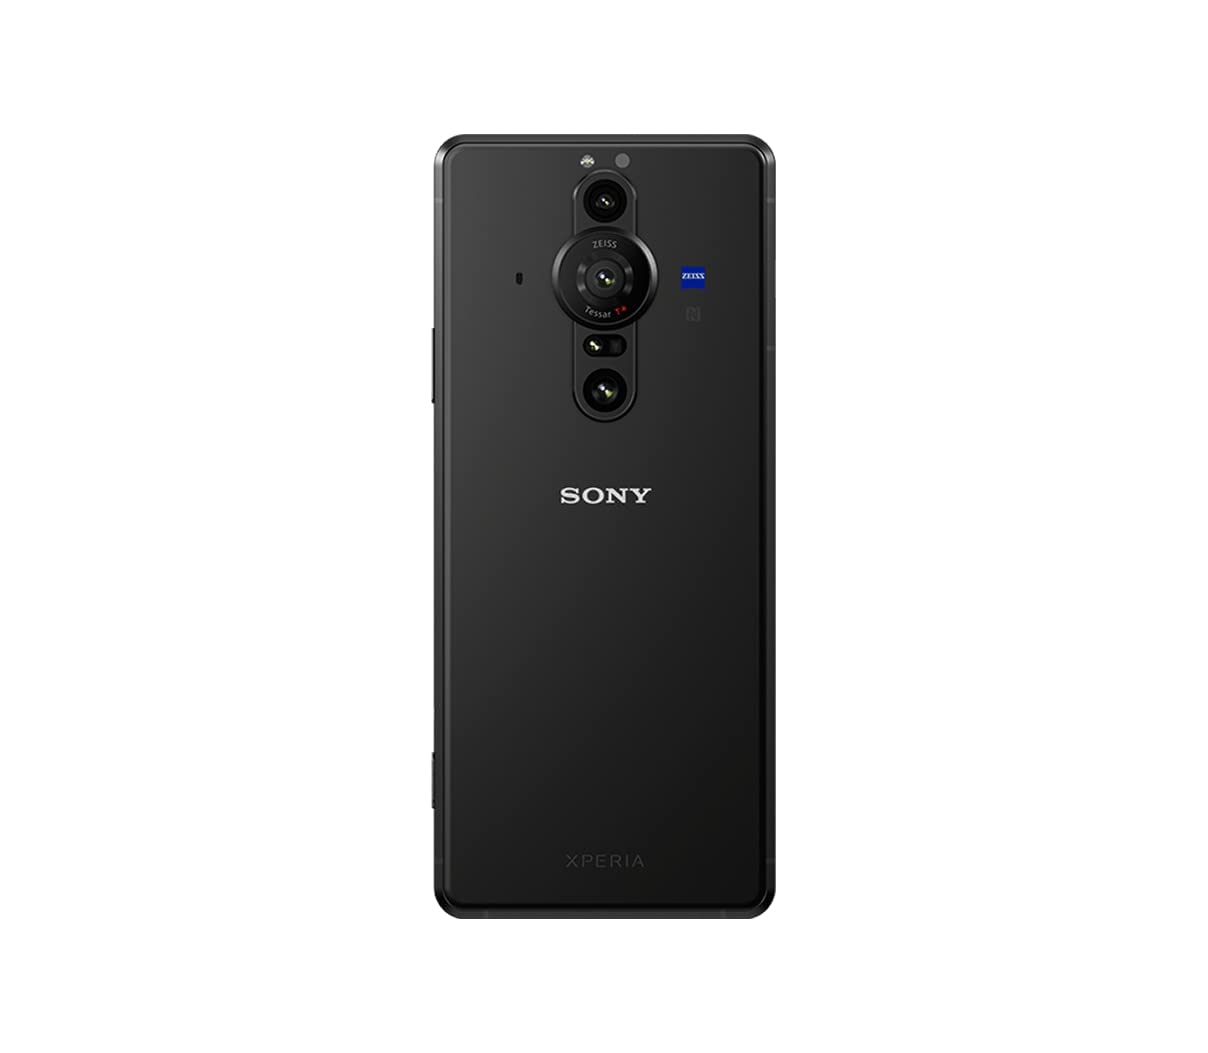 Xperia PRO-I all carriers 5G smartphone with 1-inch image sensor, triple camera array and 120Hz 6.5” 21:9 4K HDR OLED Display - XQBE62/B